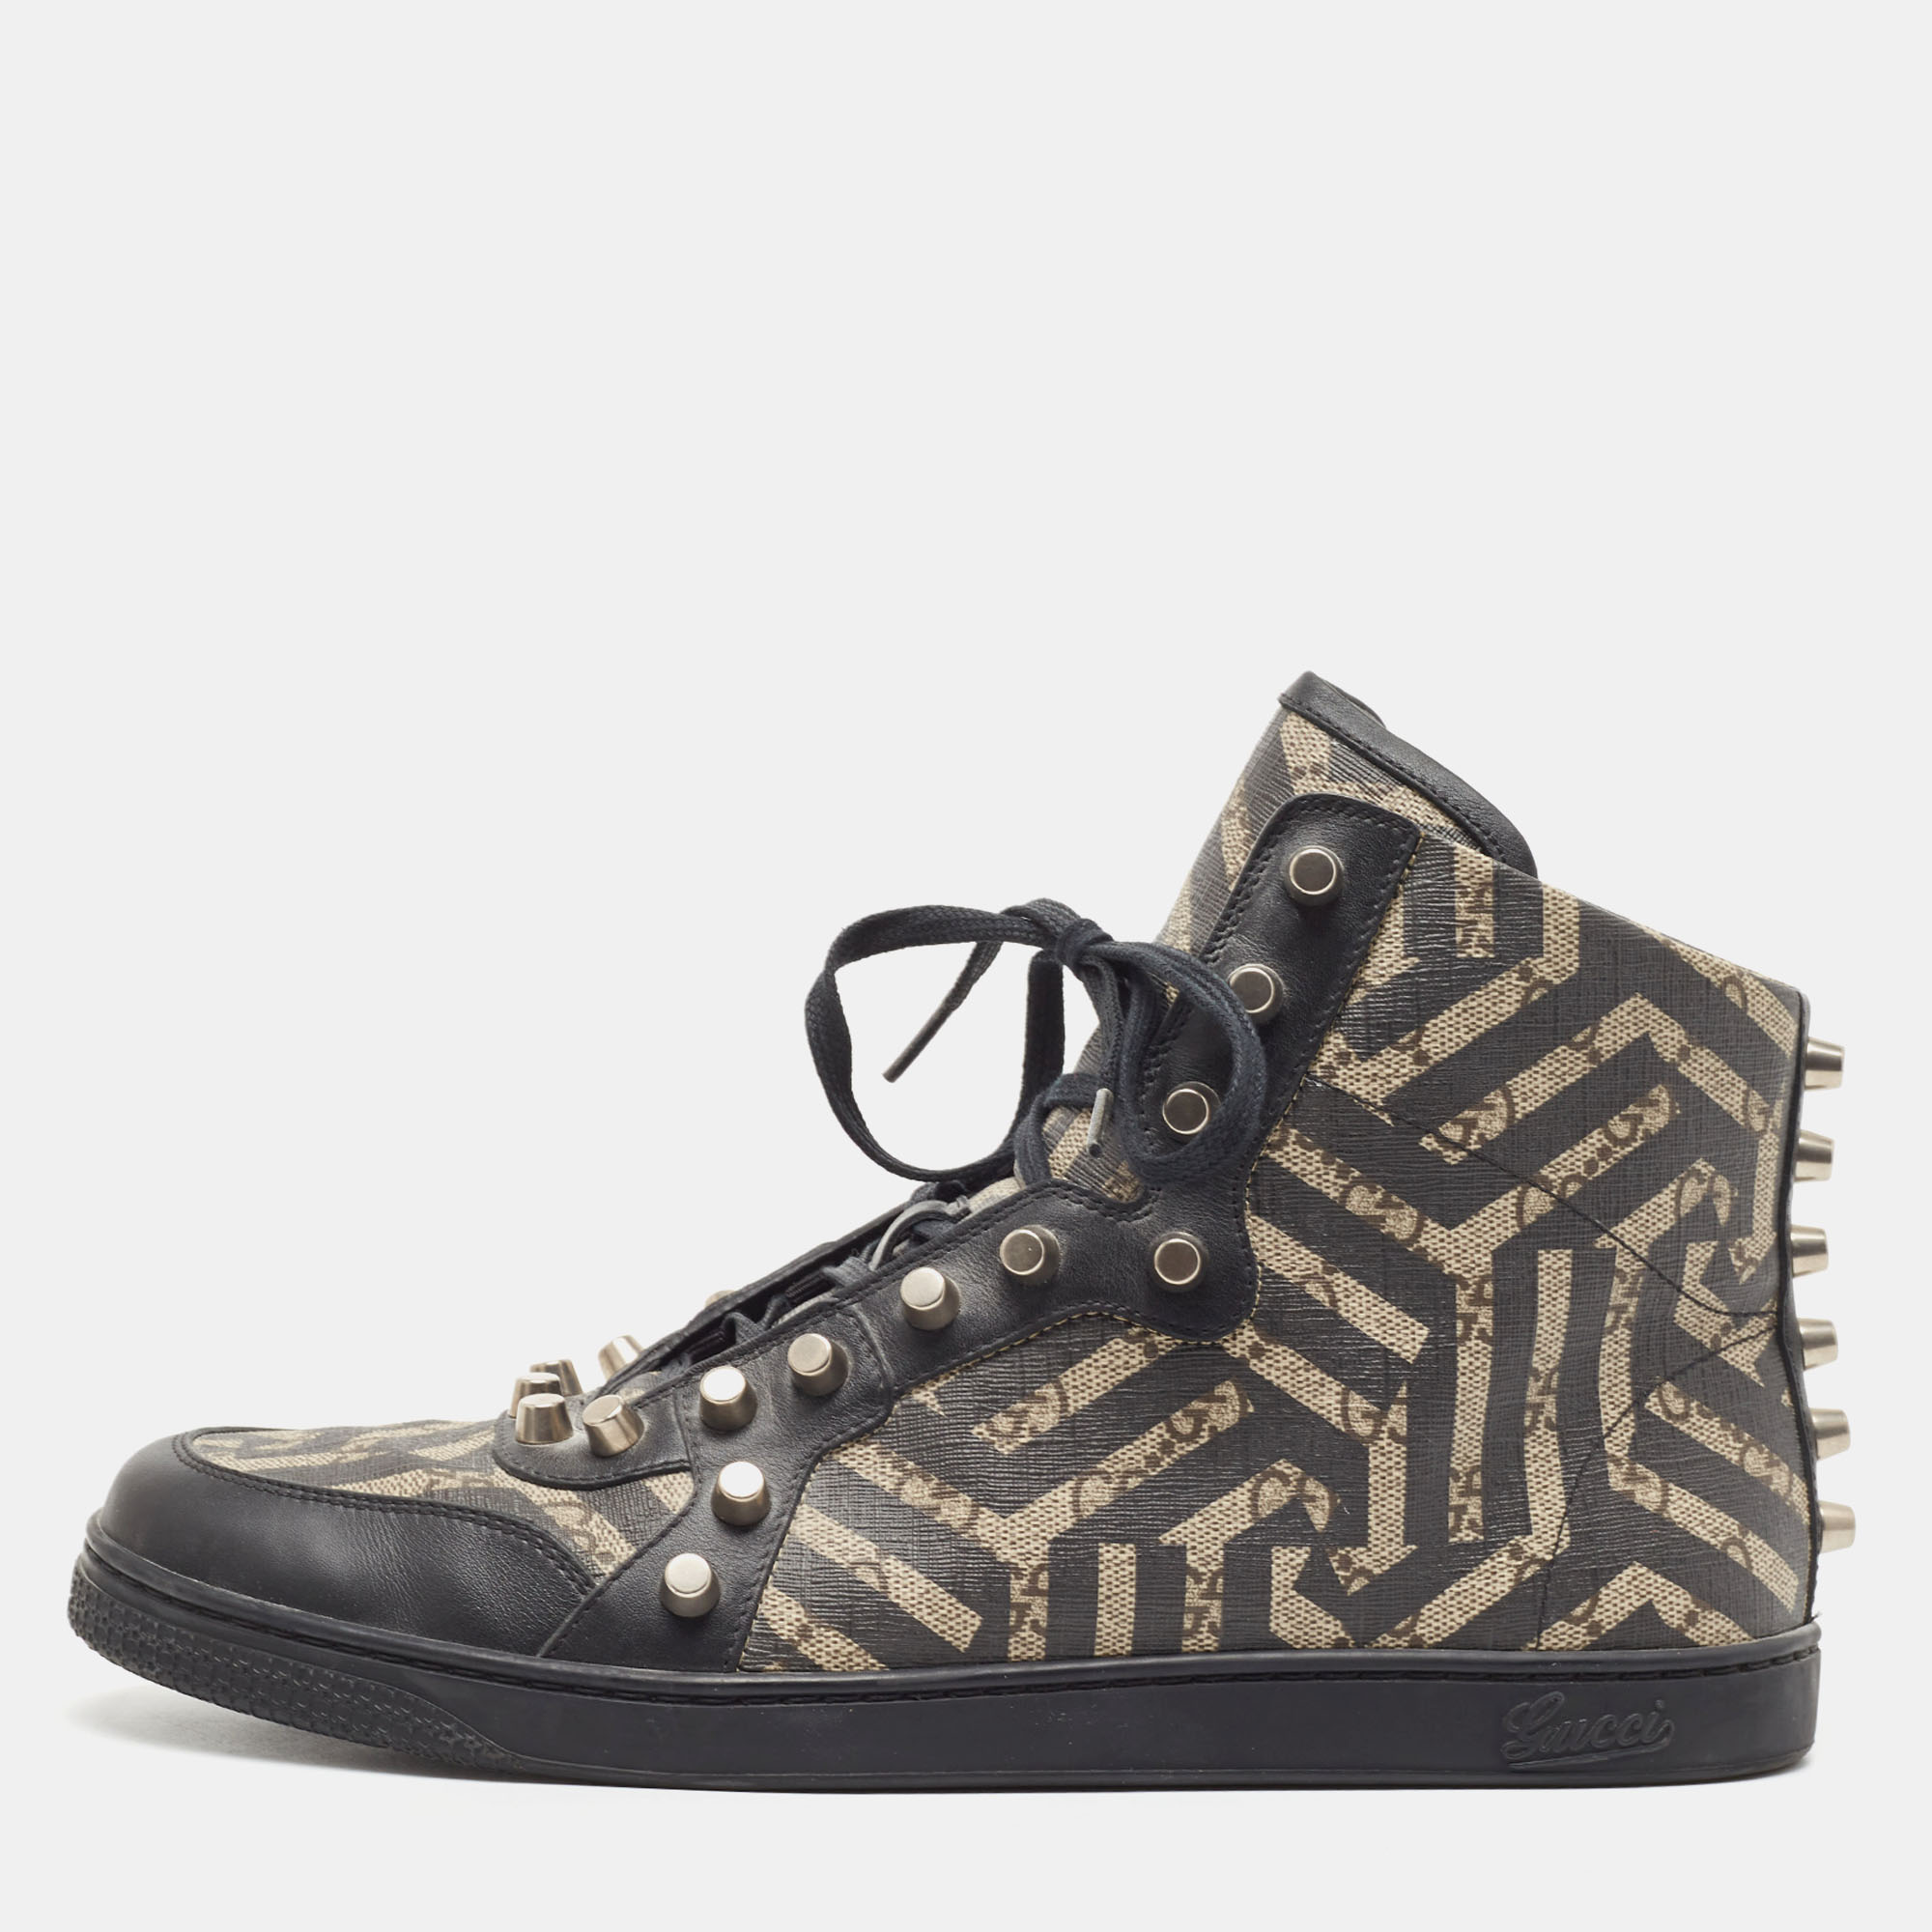 Pre-owned Gucci Black/beige Geometric Print Gg Supreme Canvas And Leather High Top Sneaker Size 43